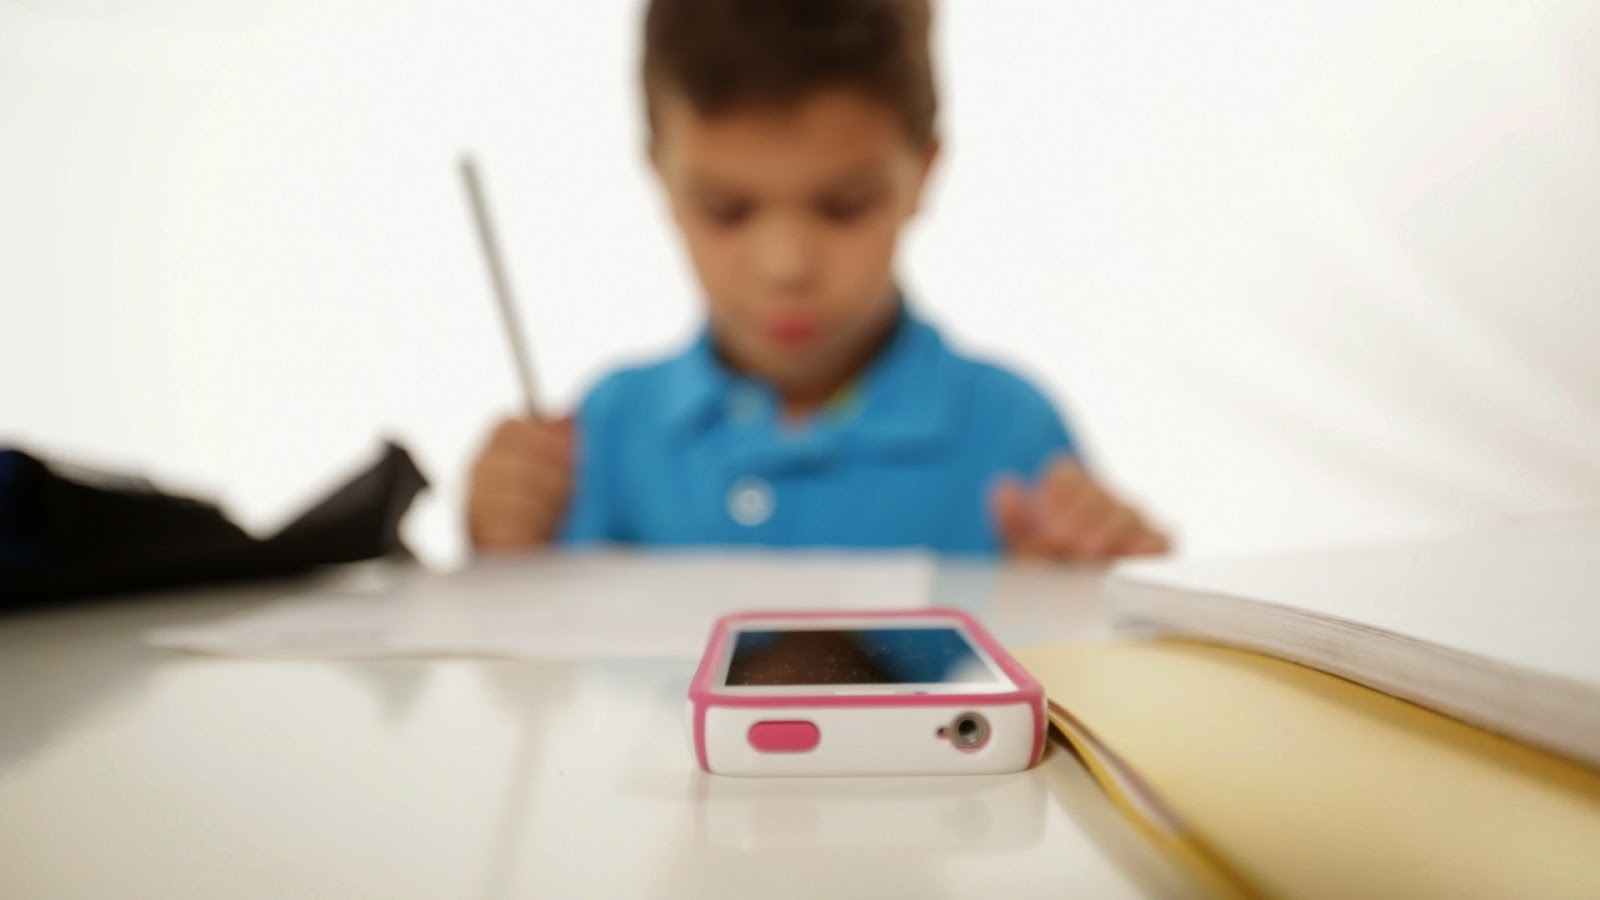 Should You Use The GPS In Your Child's Phone?